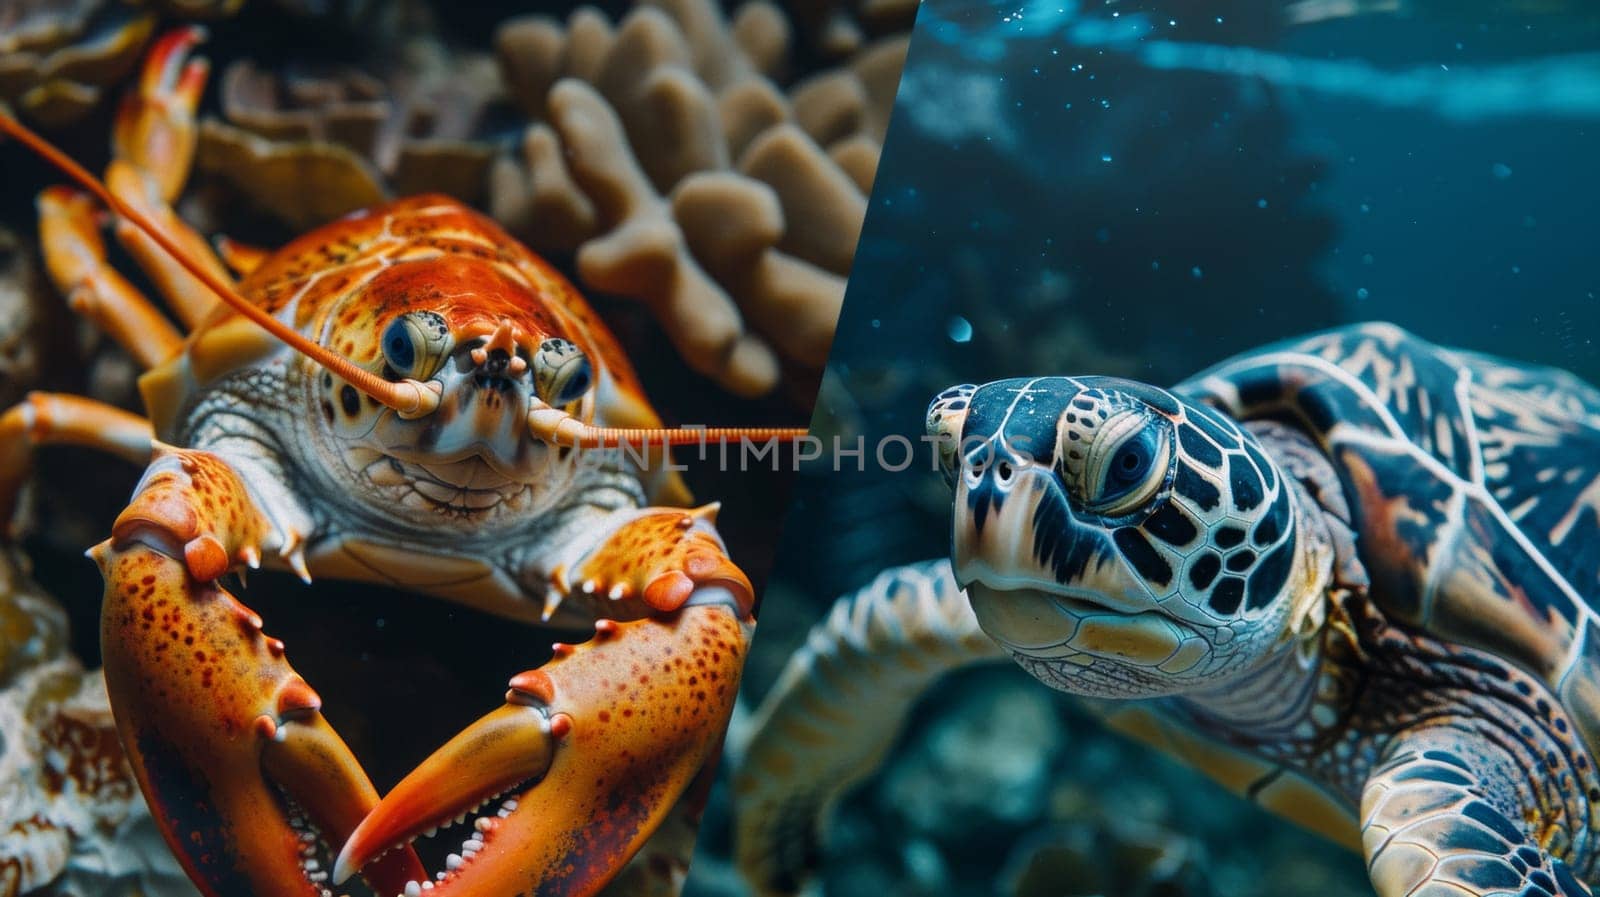 Two pictures of a turtle and an octopus in the ocean